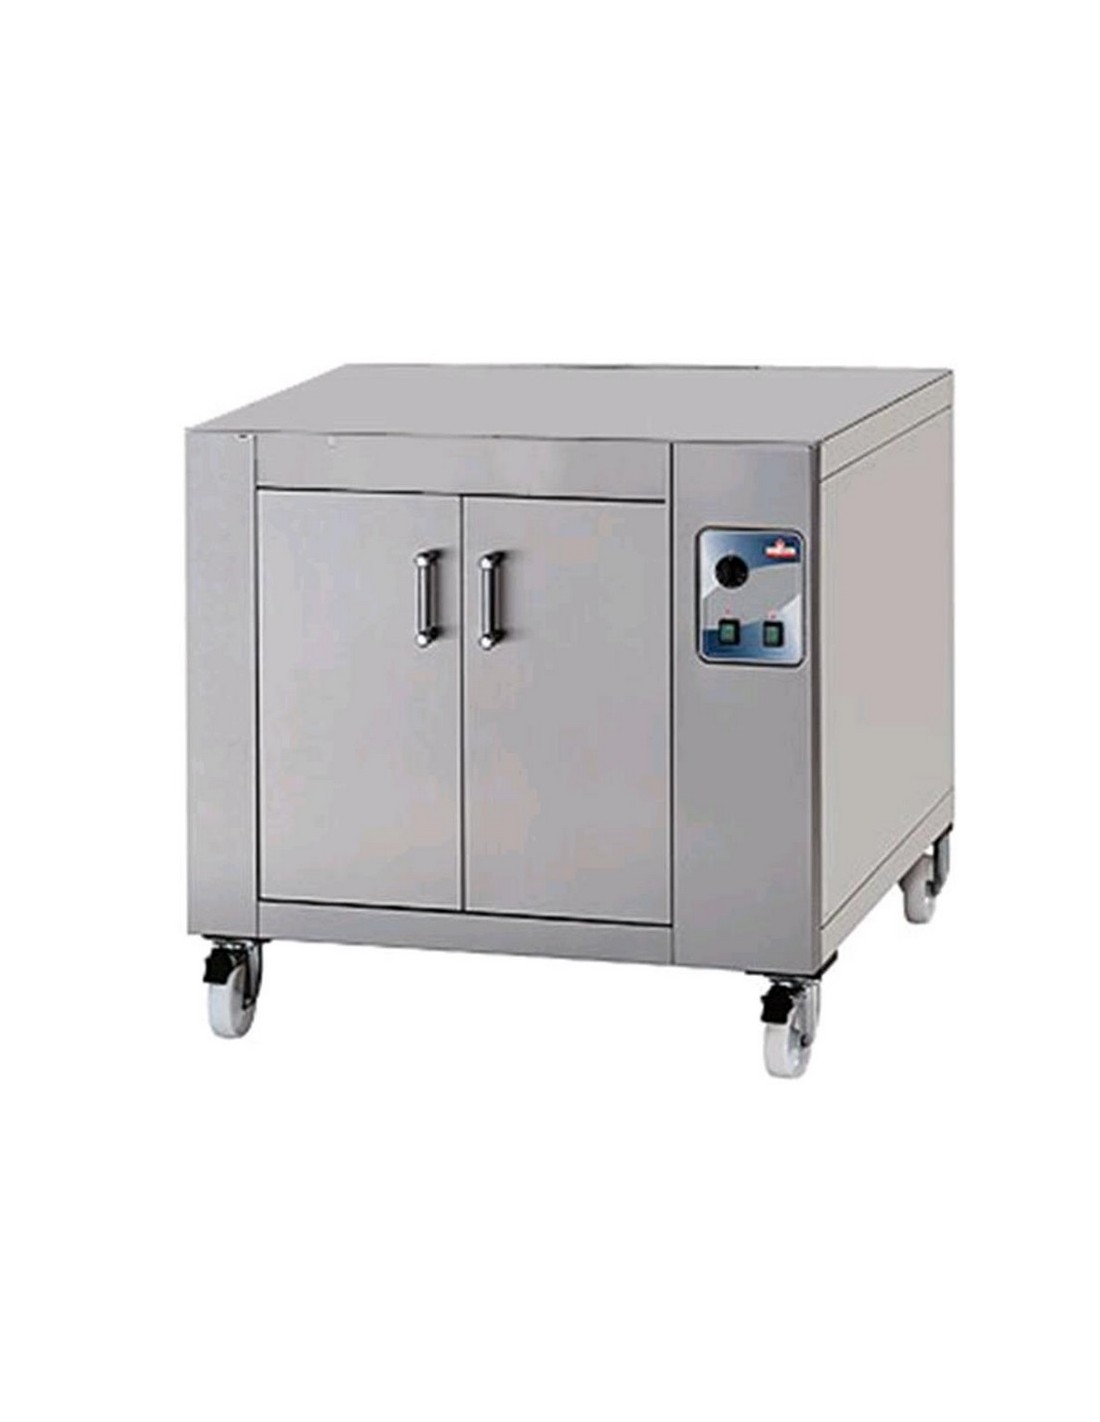 Pizza Baking Cell Model TK - Height cm 86 - Inox front